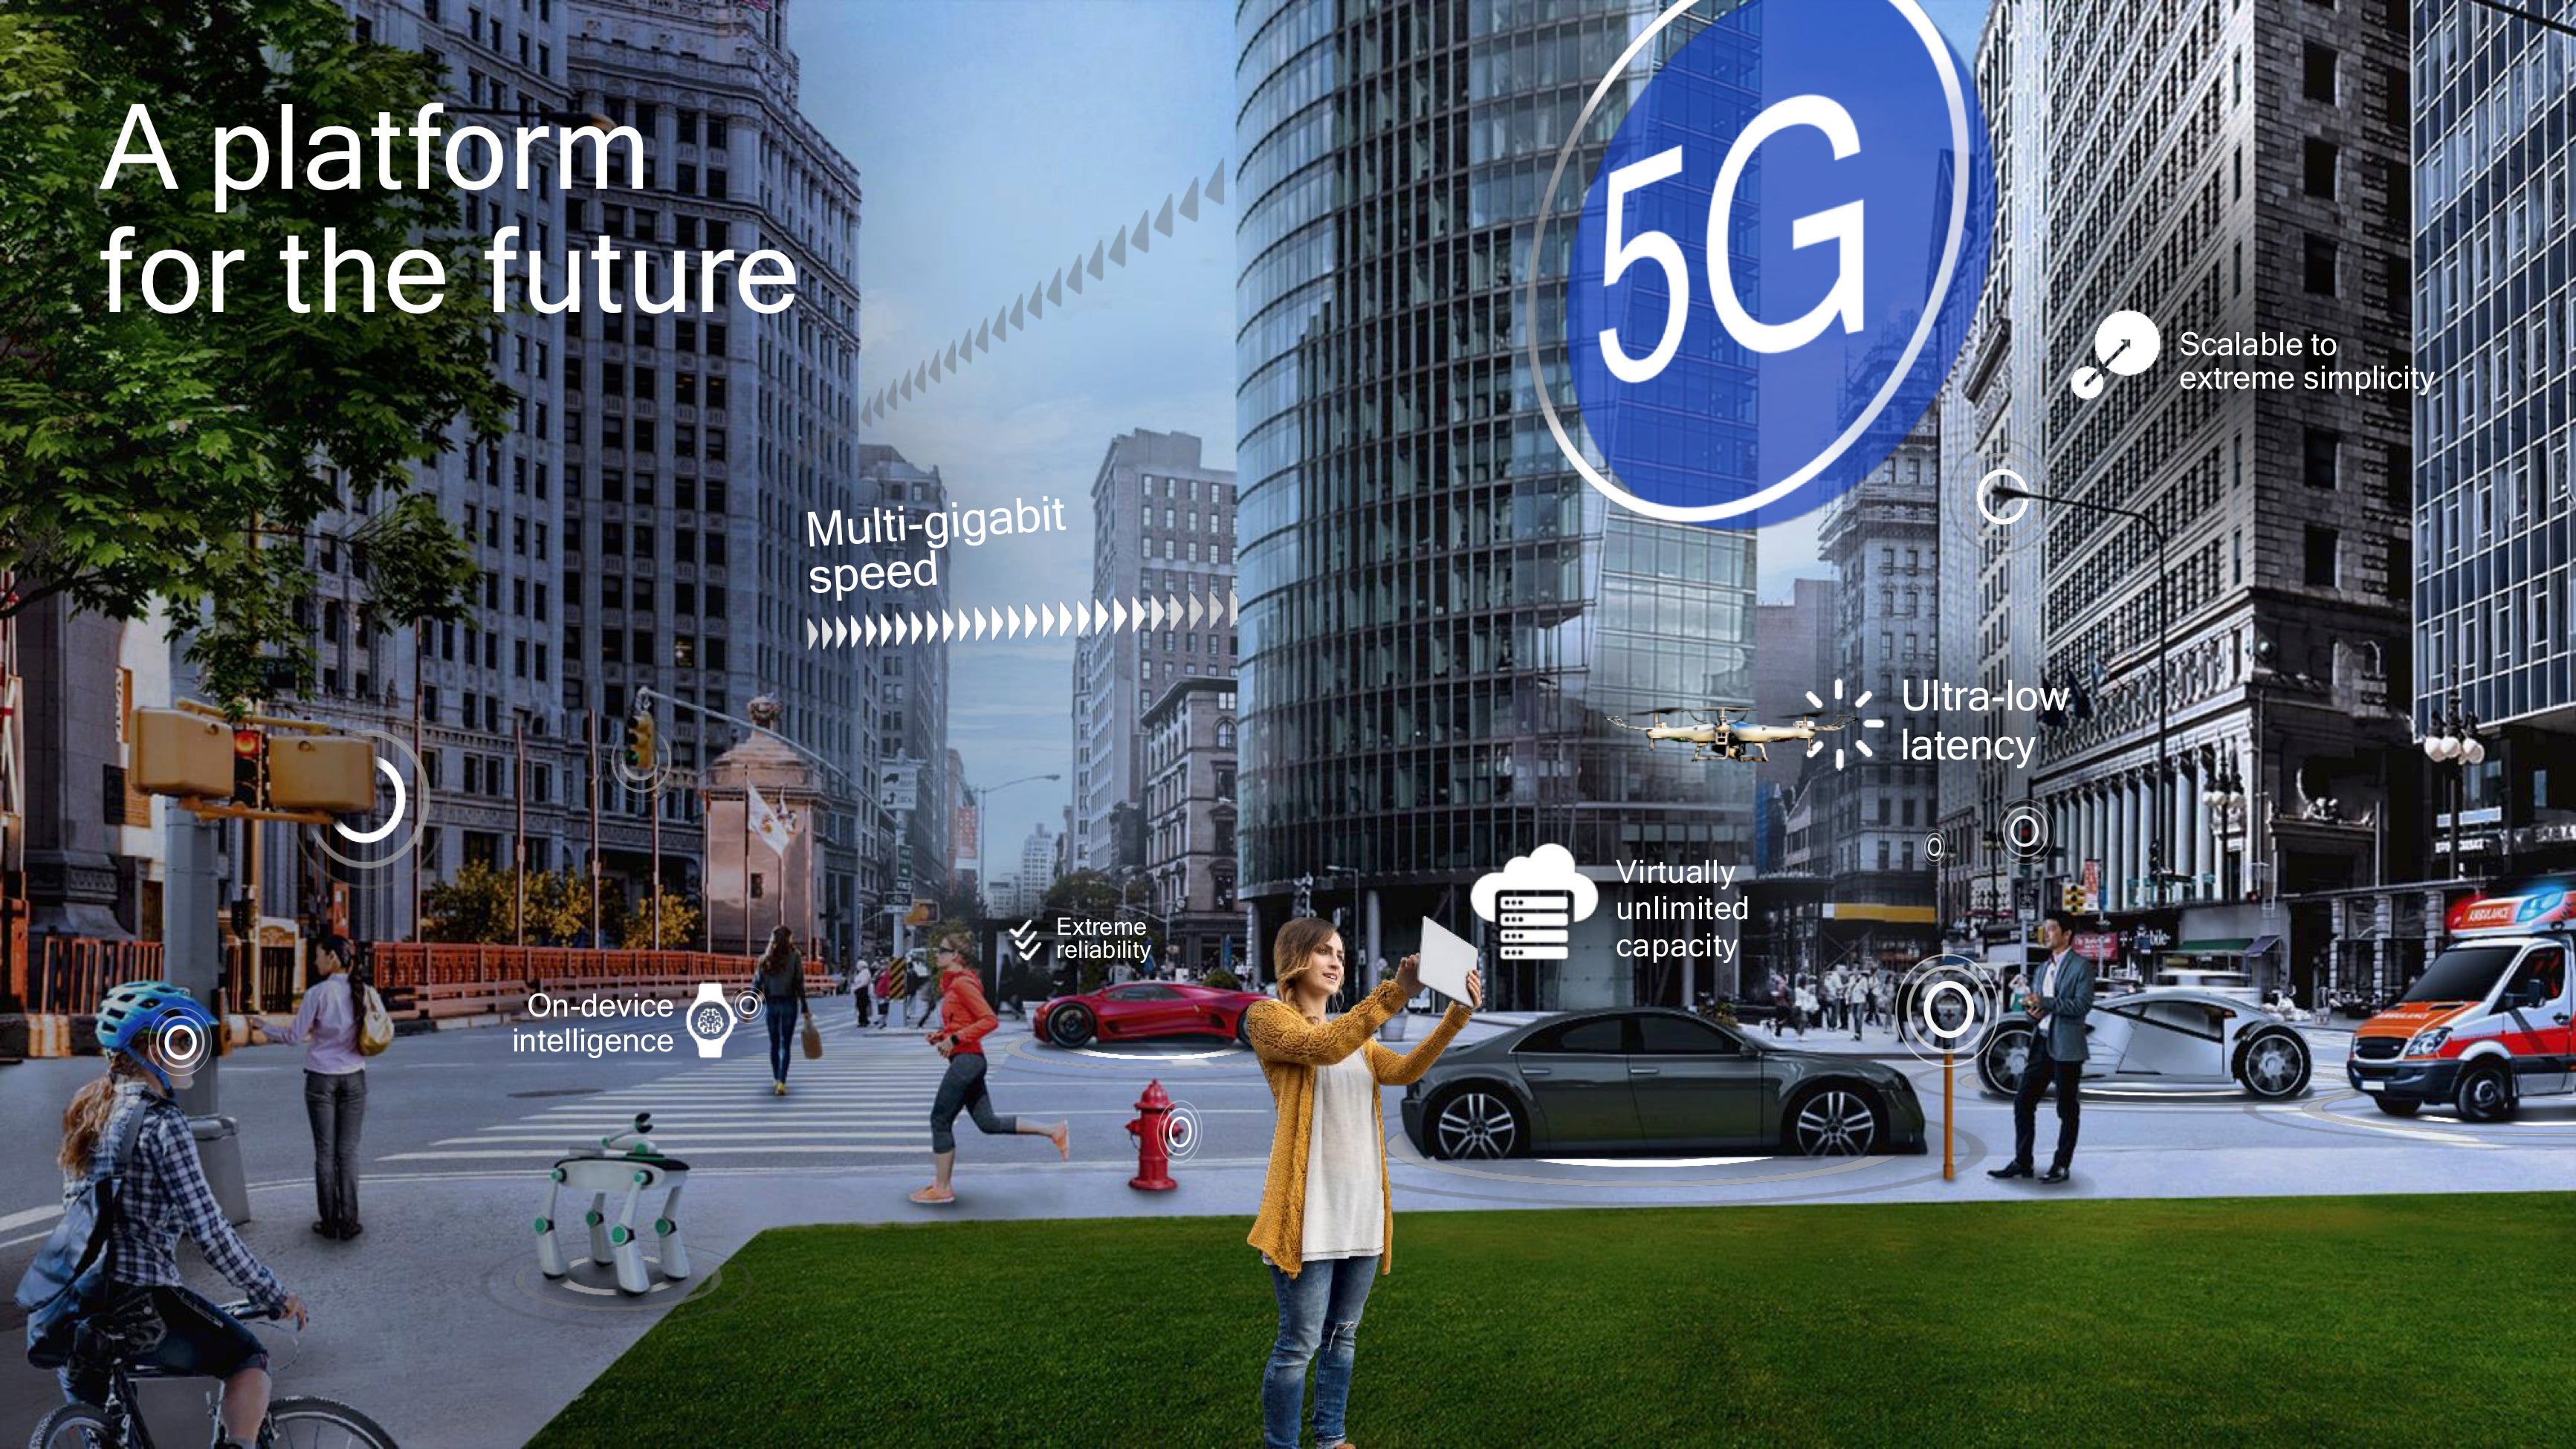 The 5G world is closer than you think, what will life look like?